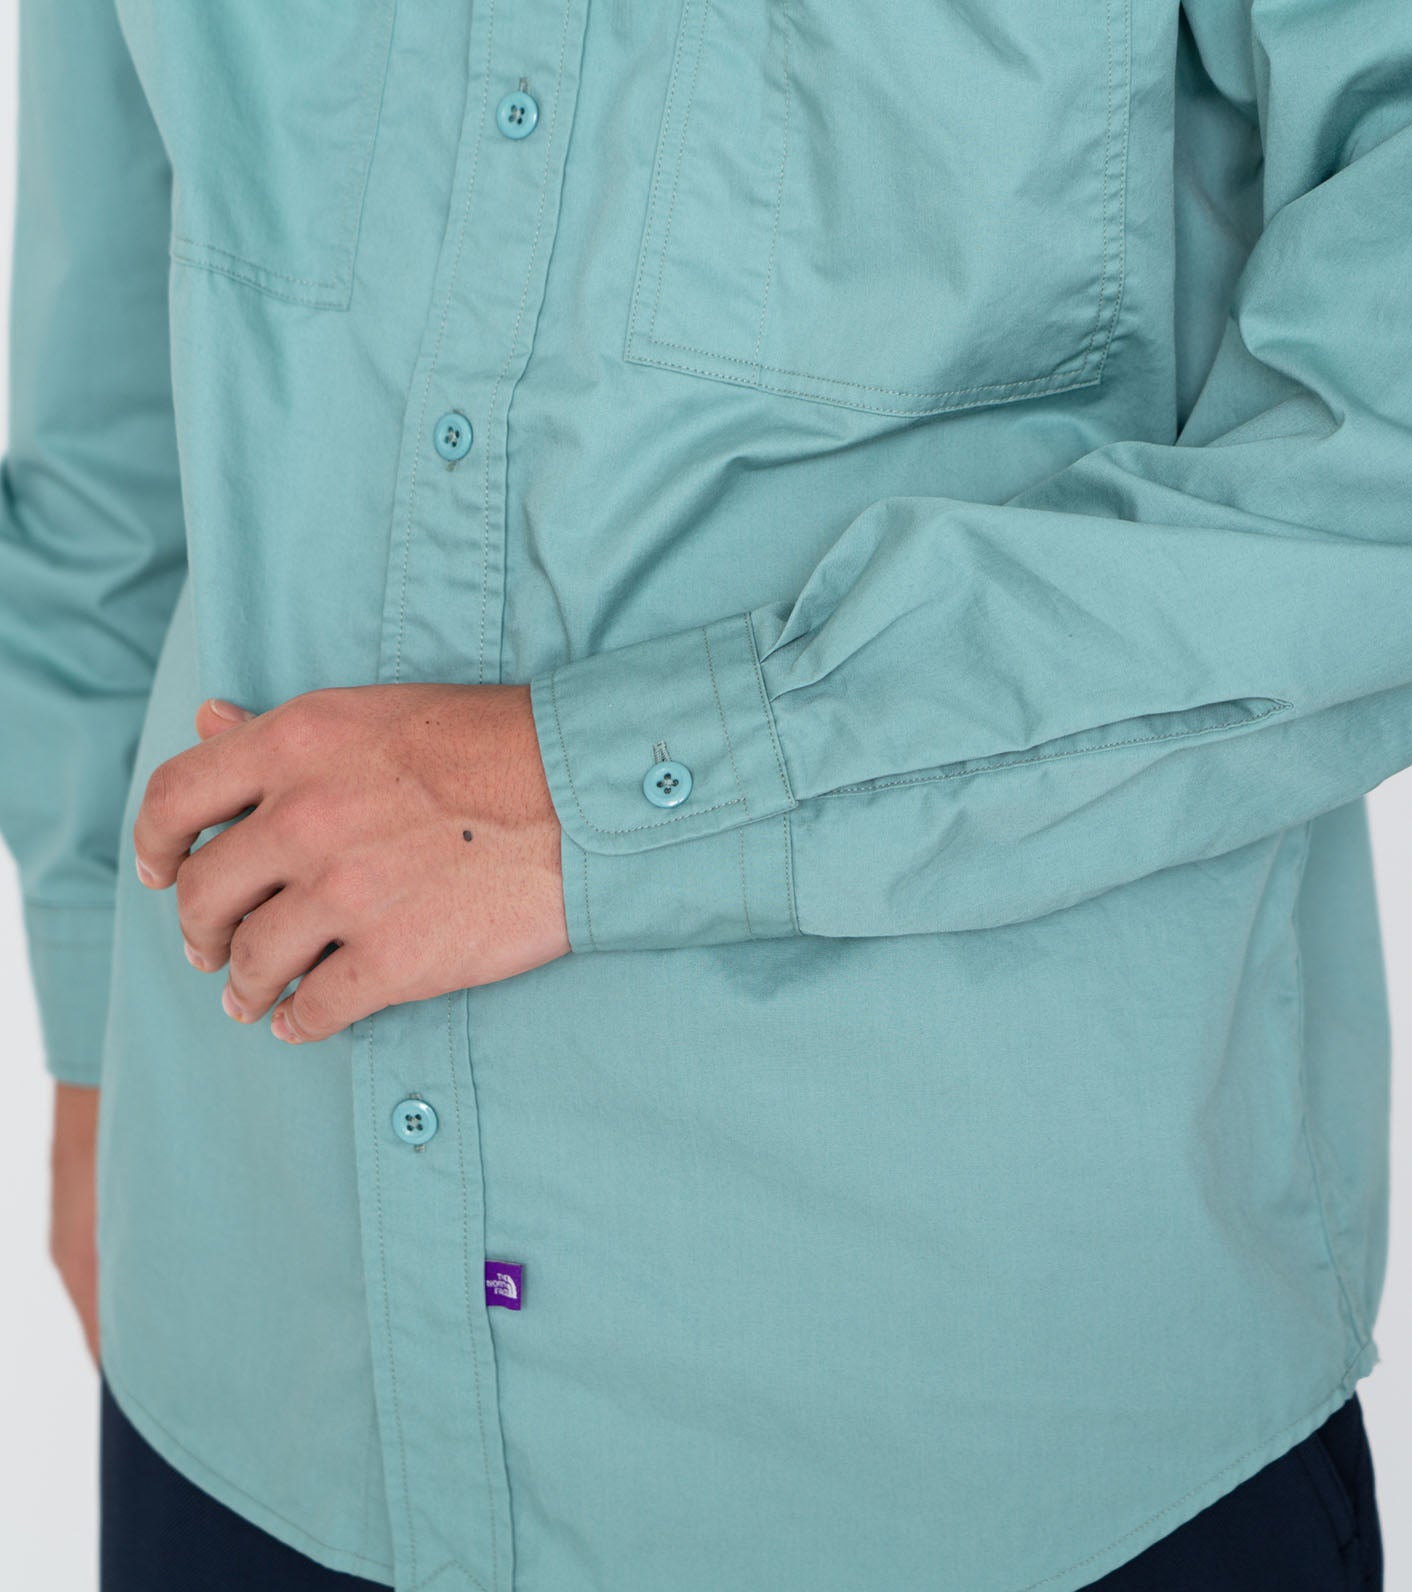 THE NORTH FACE PURPLE LABEL Double Pocket Field Work Shirt